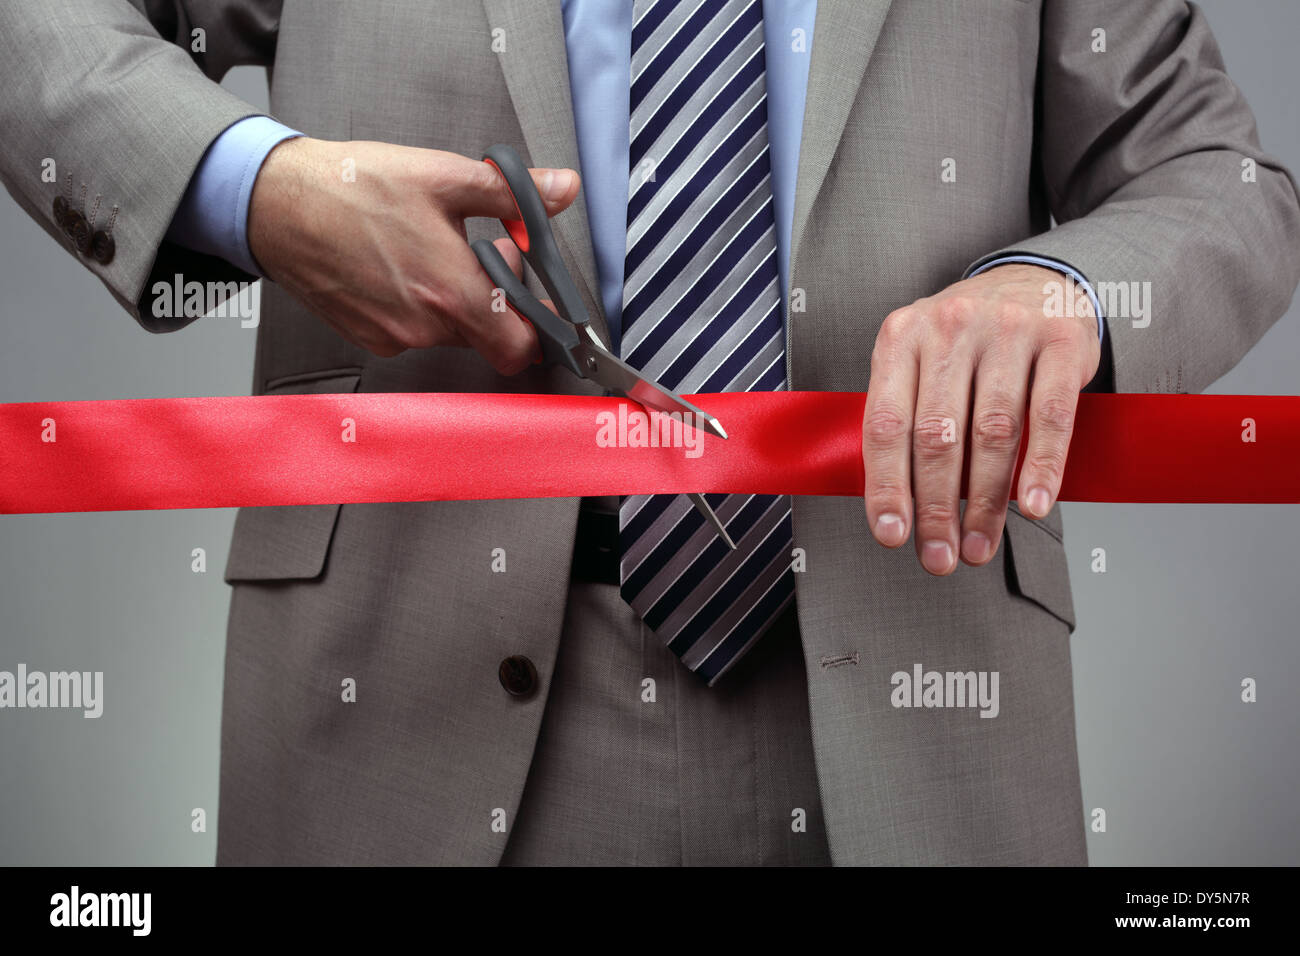 Cut Through Red Tape With These Business Tips - TechGeek365